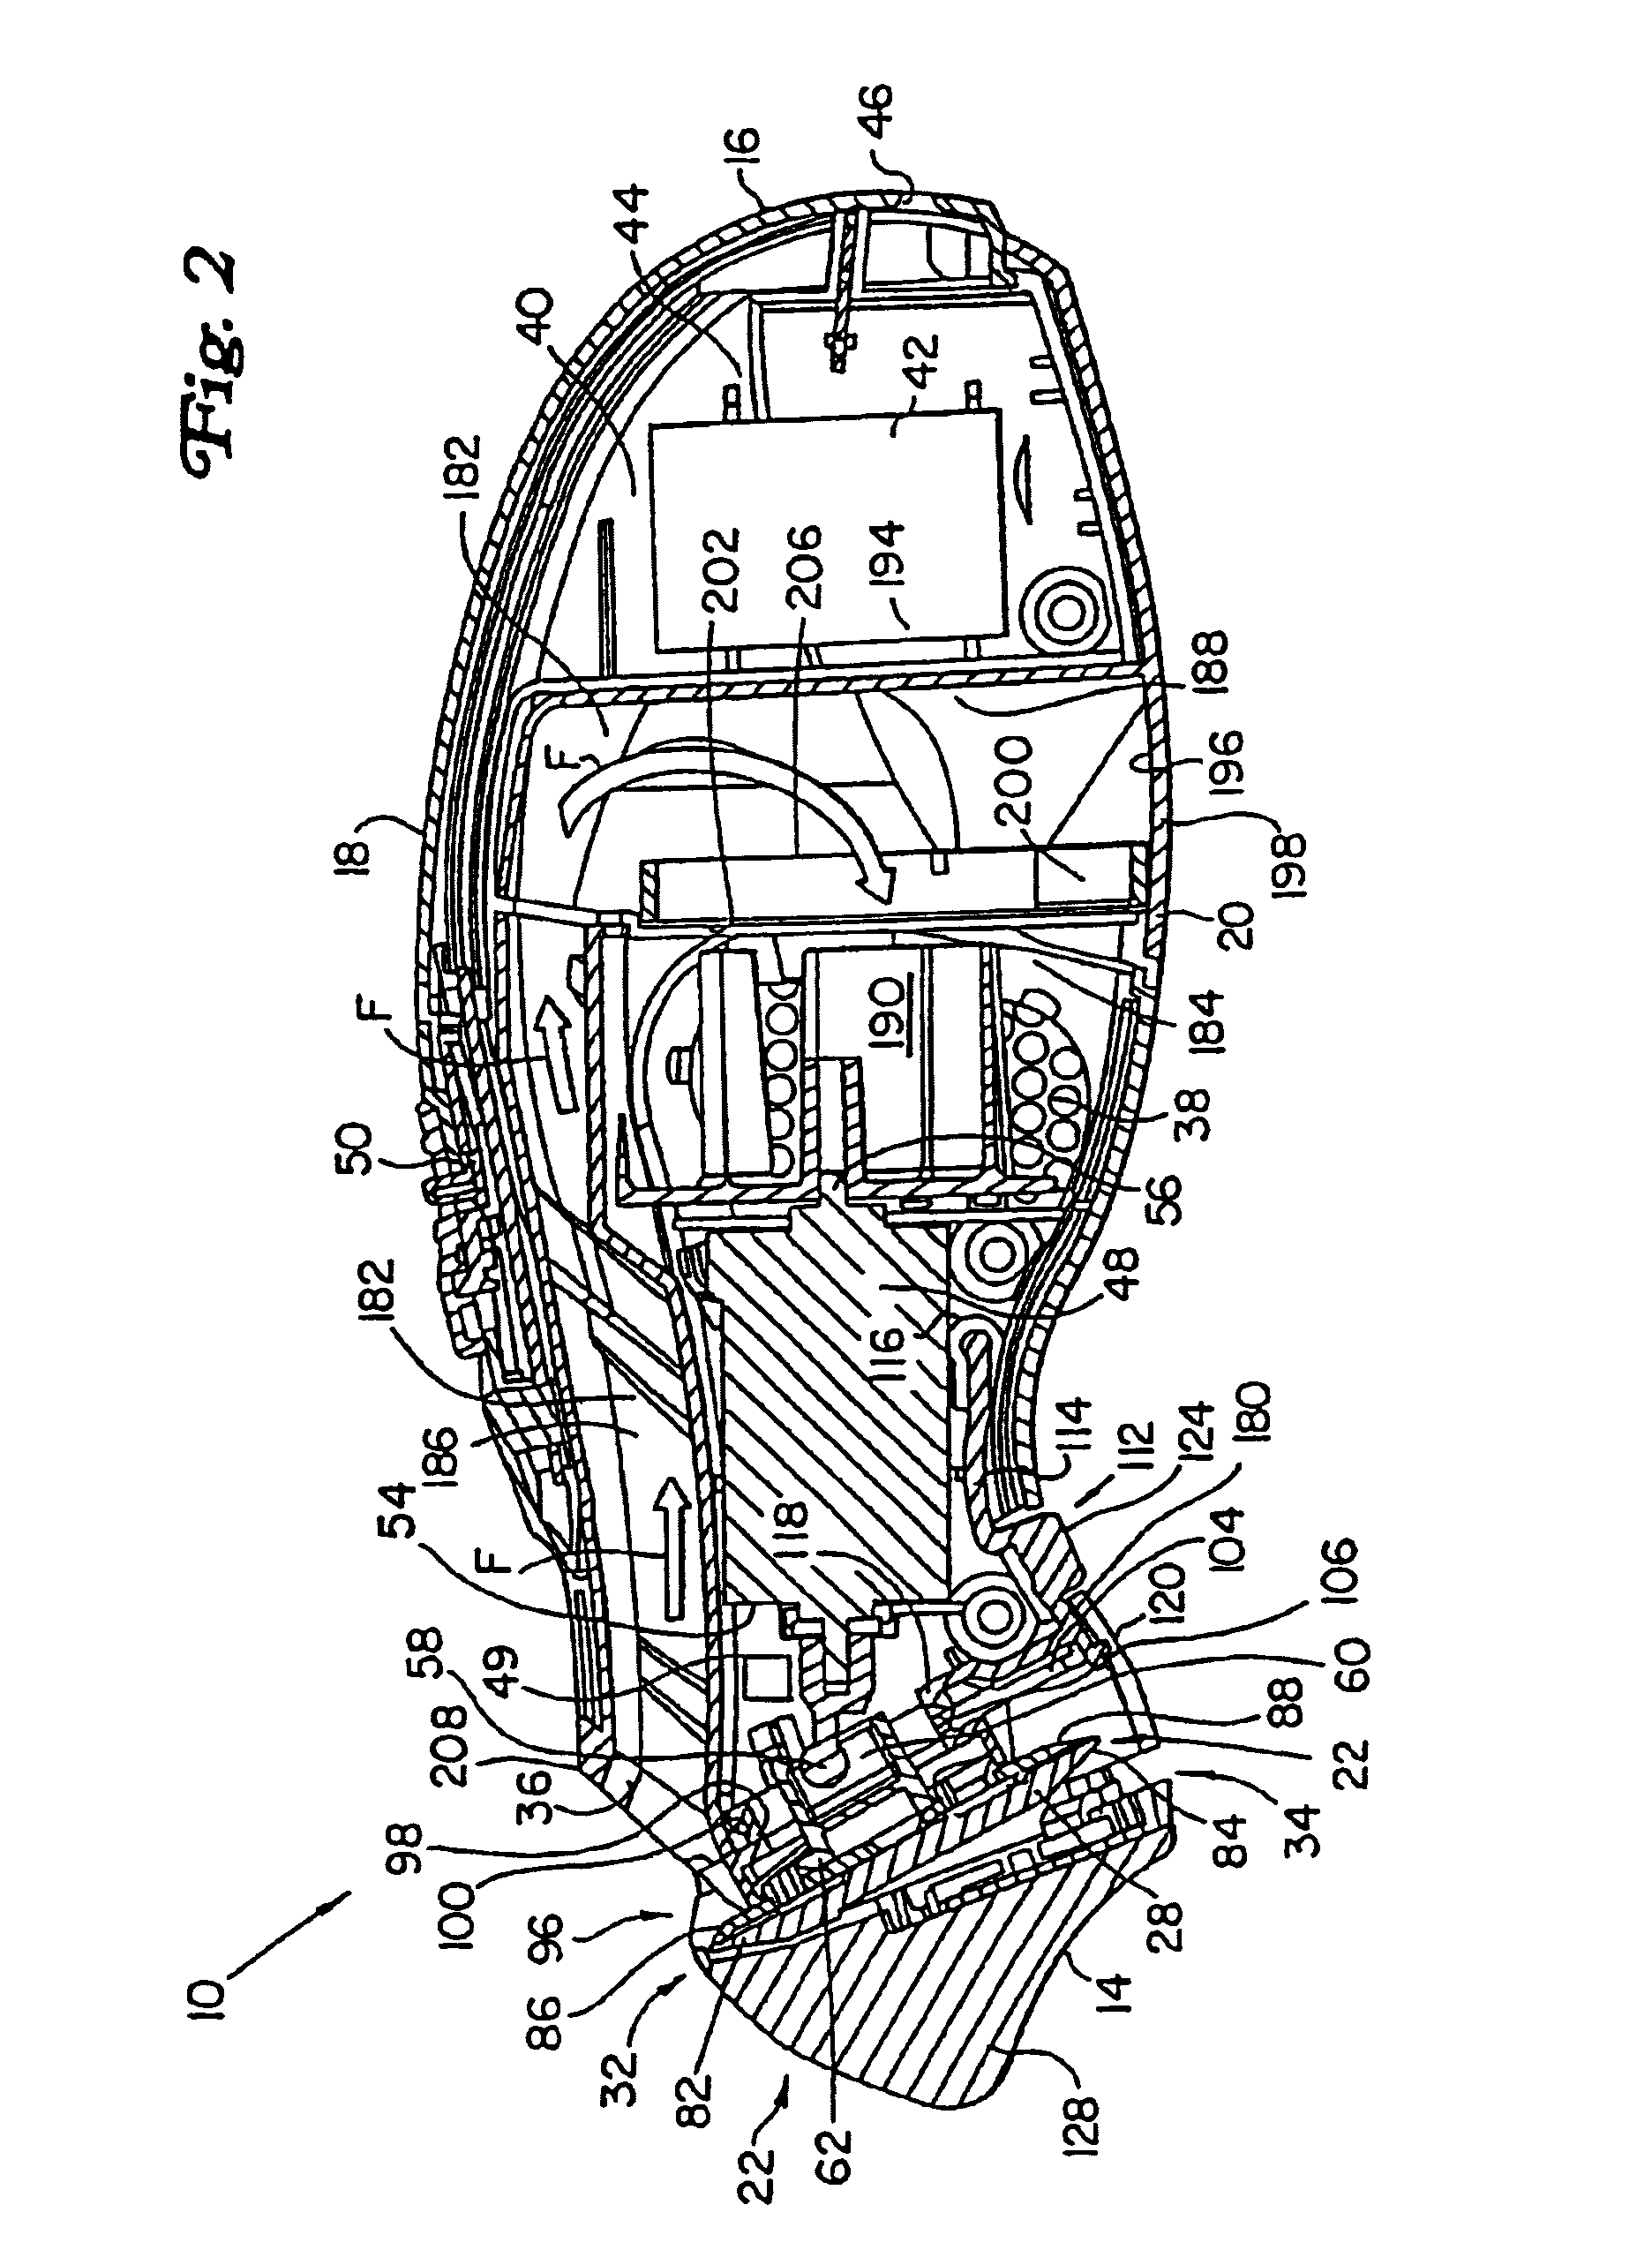 Hair clipping device with rotating bladeset having multiple cutting edges